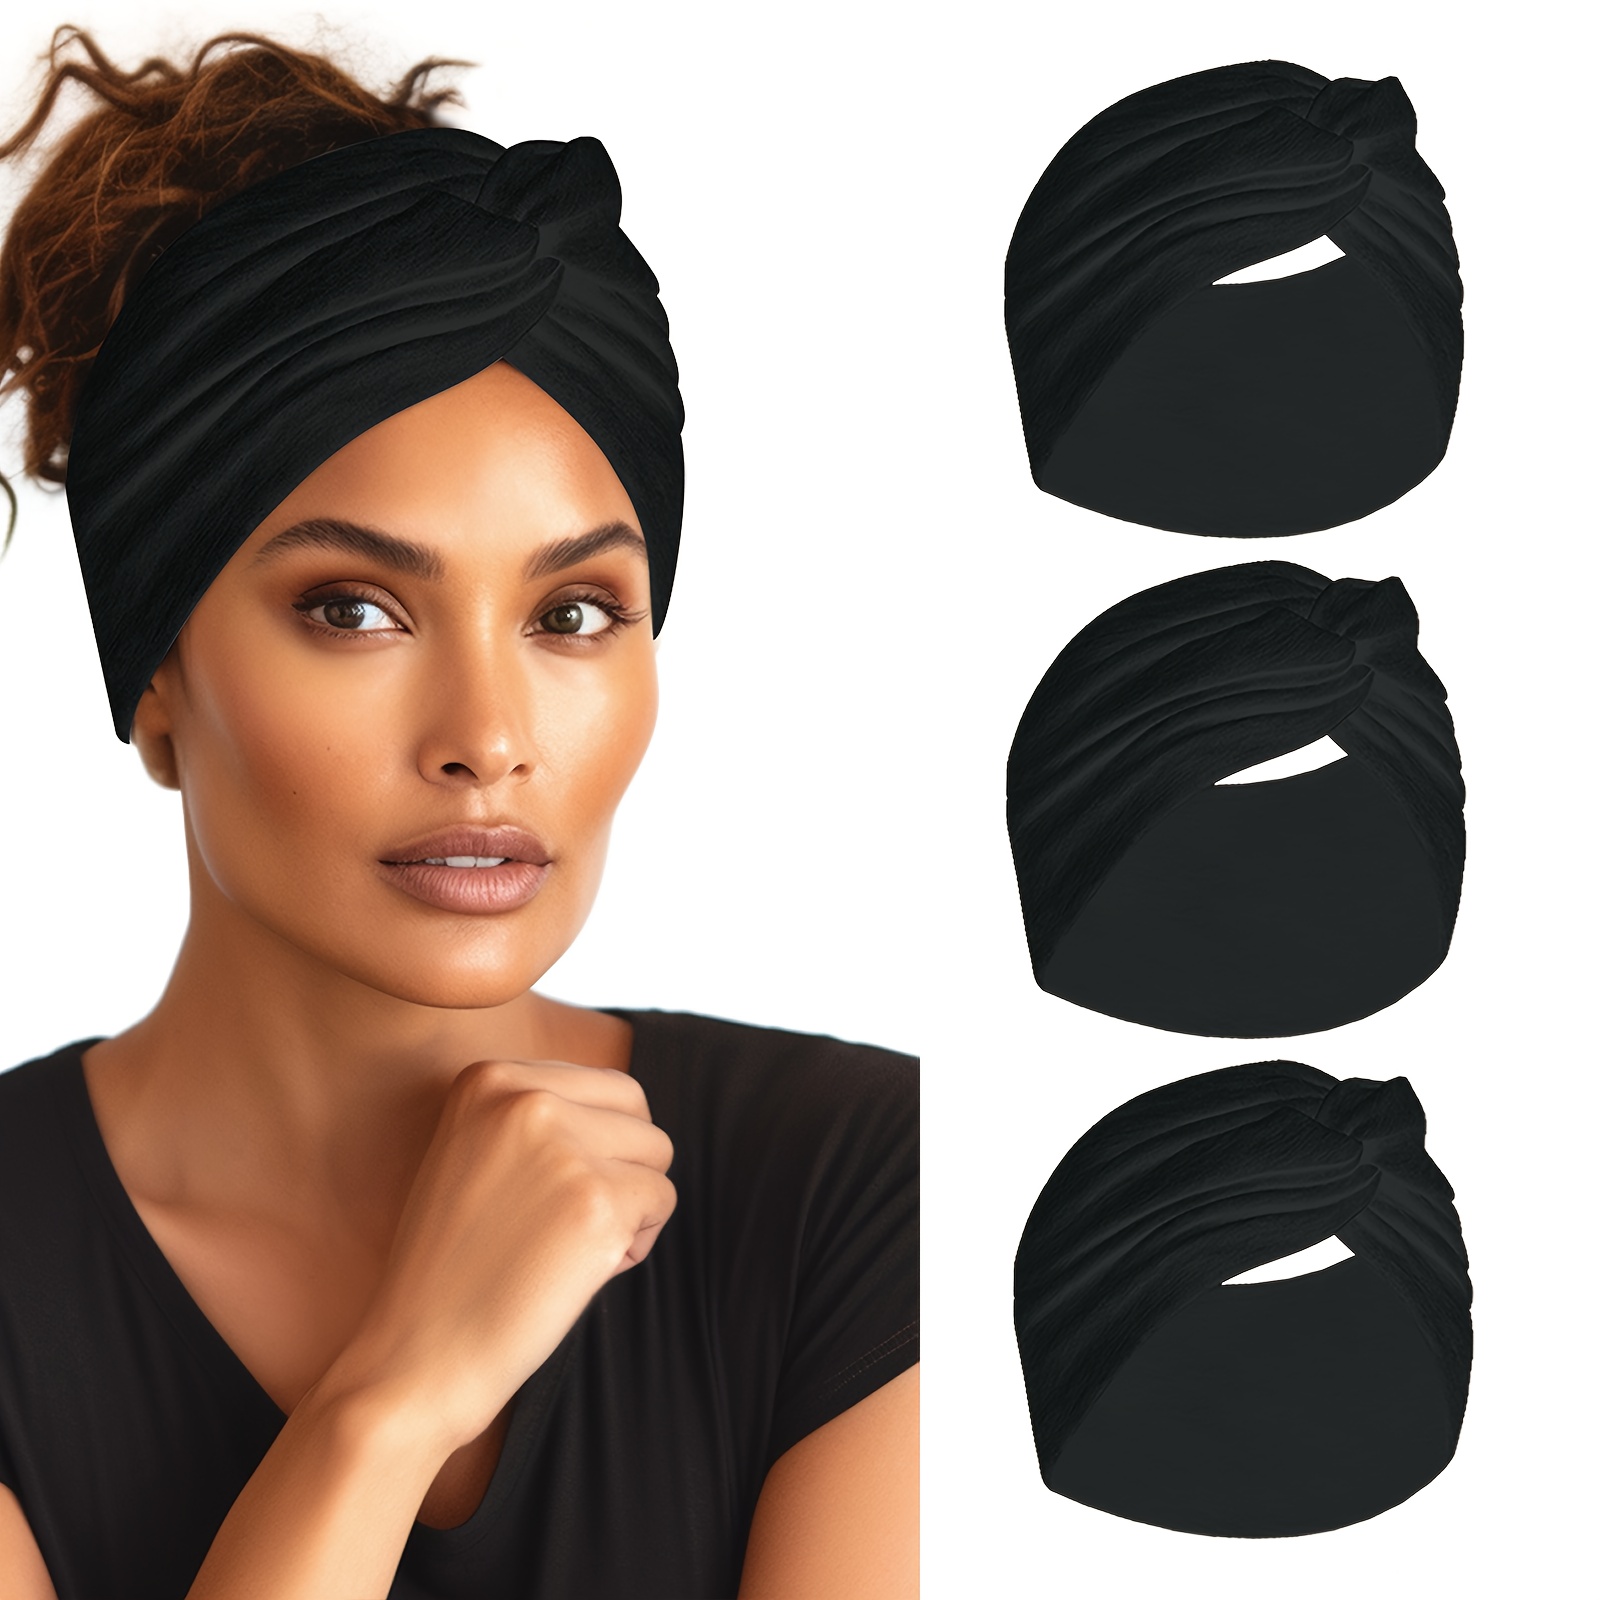 

3pcs Black Color Wide-brimmed Headbands Soft Yoga Sports Hair Bands Non-slip Elastic Hairband Sweat-absorbing Wrap Hair Band